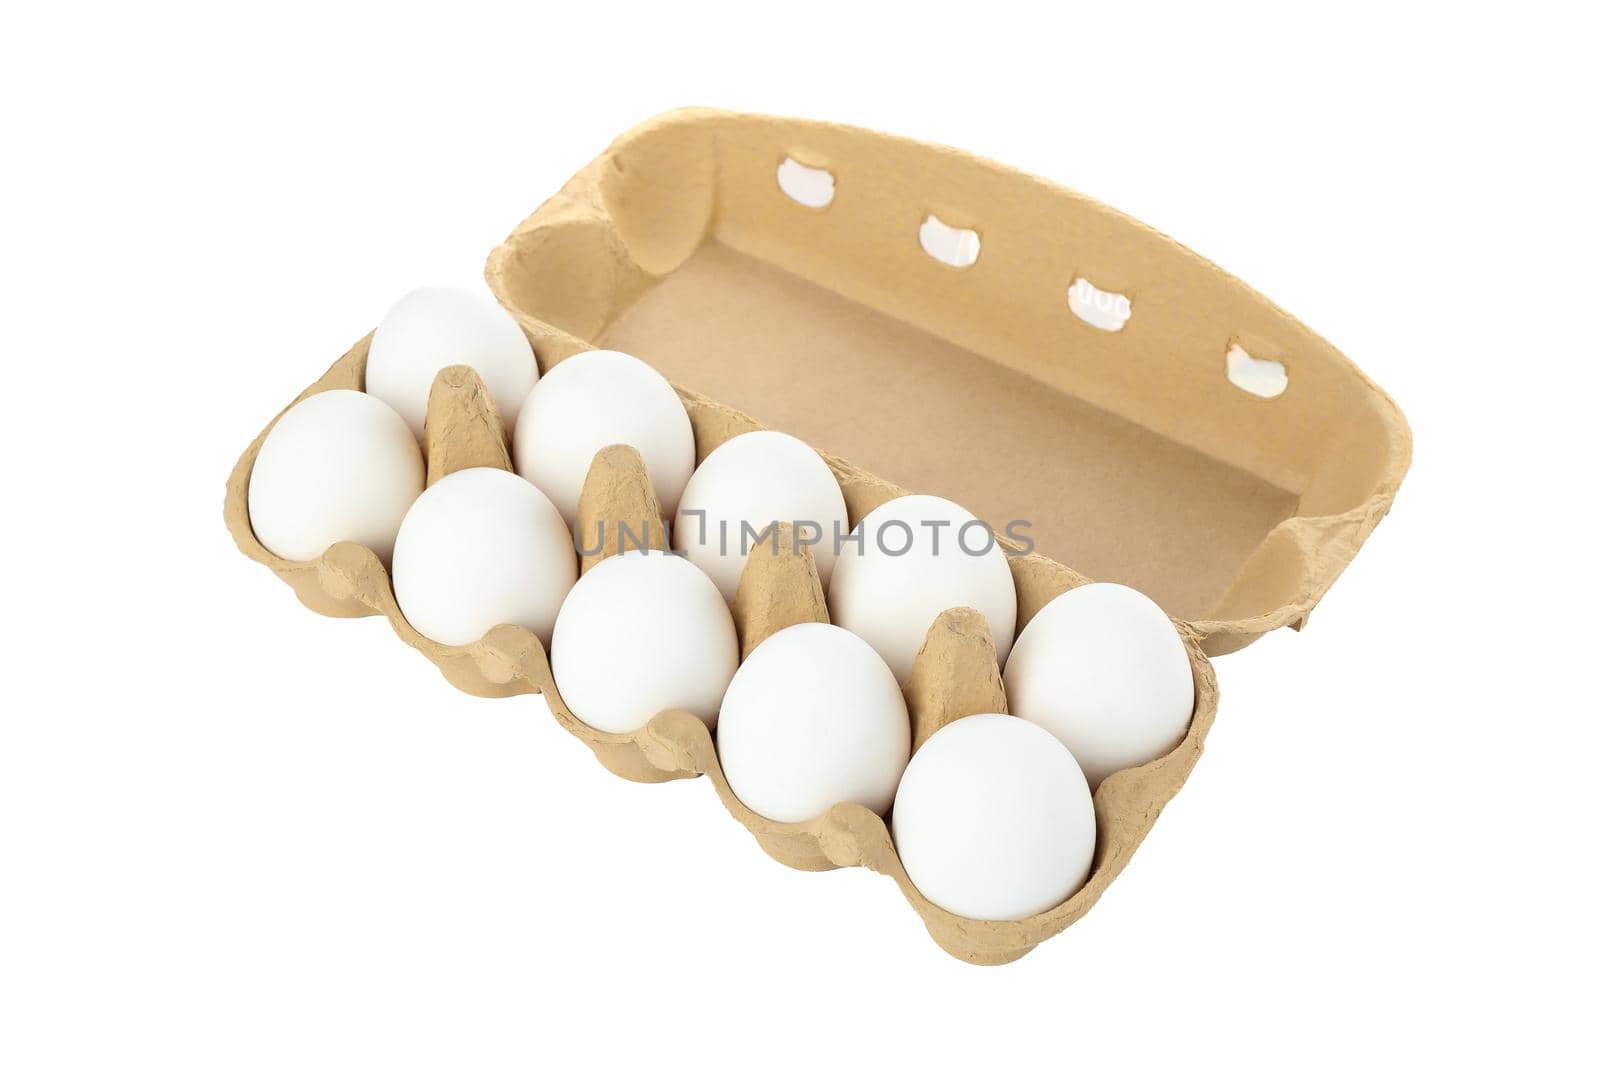 Few raw chicken eggs in carton box on white background by AtlasCompany